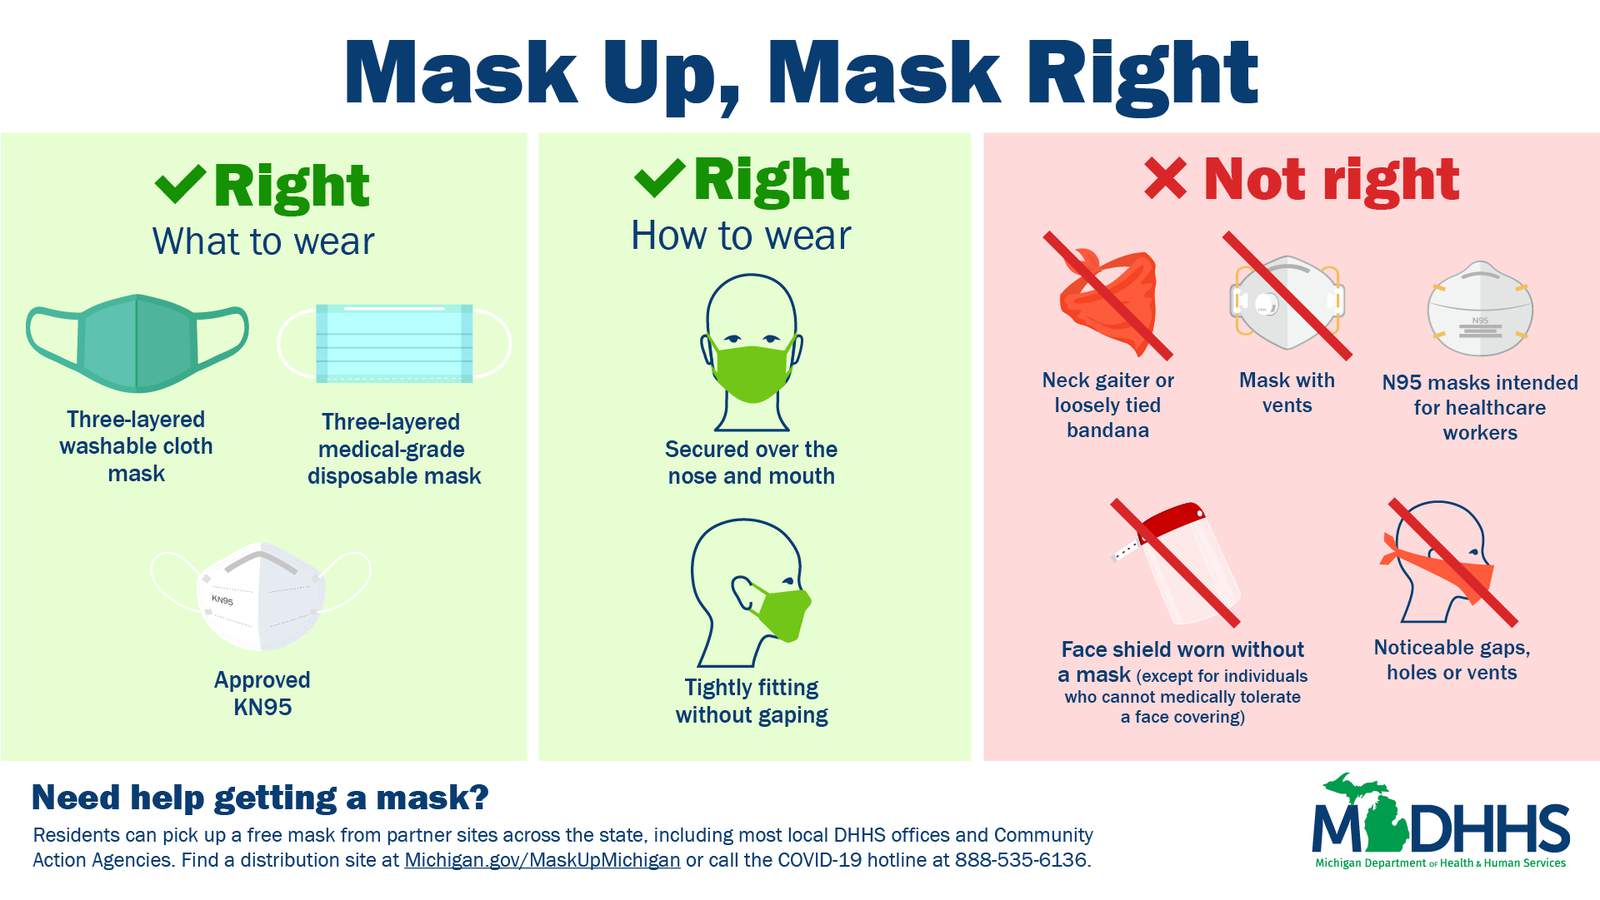 MDHHS asks Michiganders to ‘Mask Up, Mask Right’